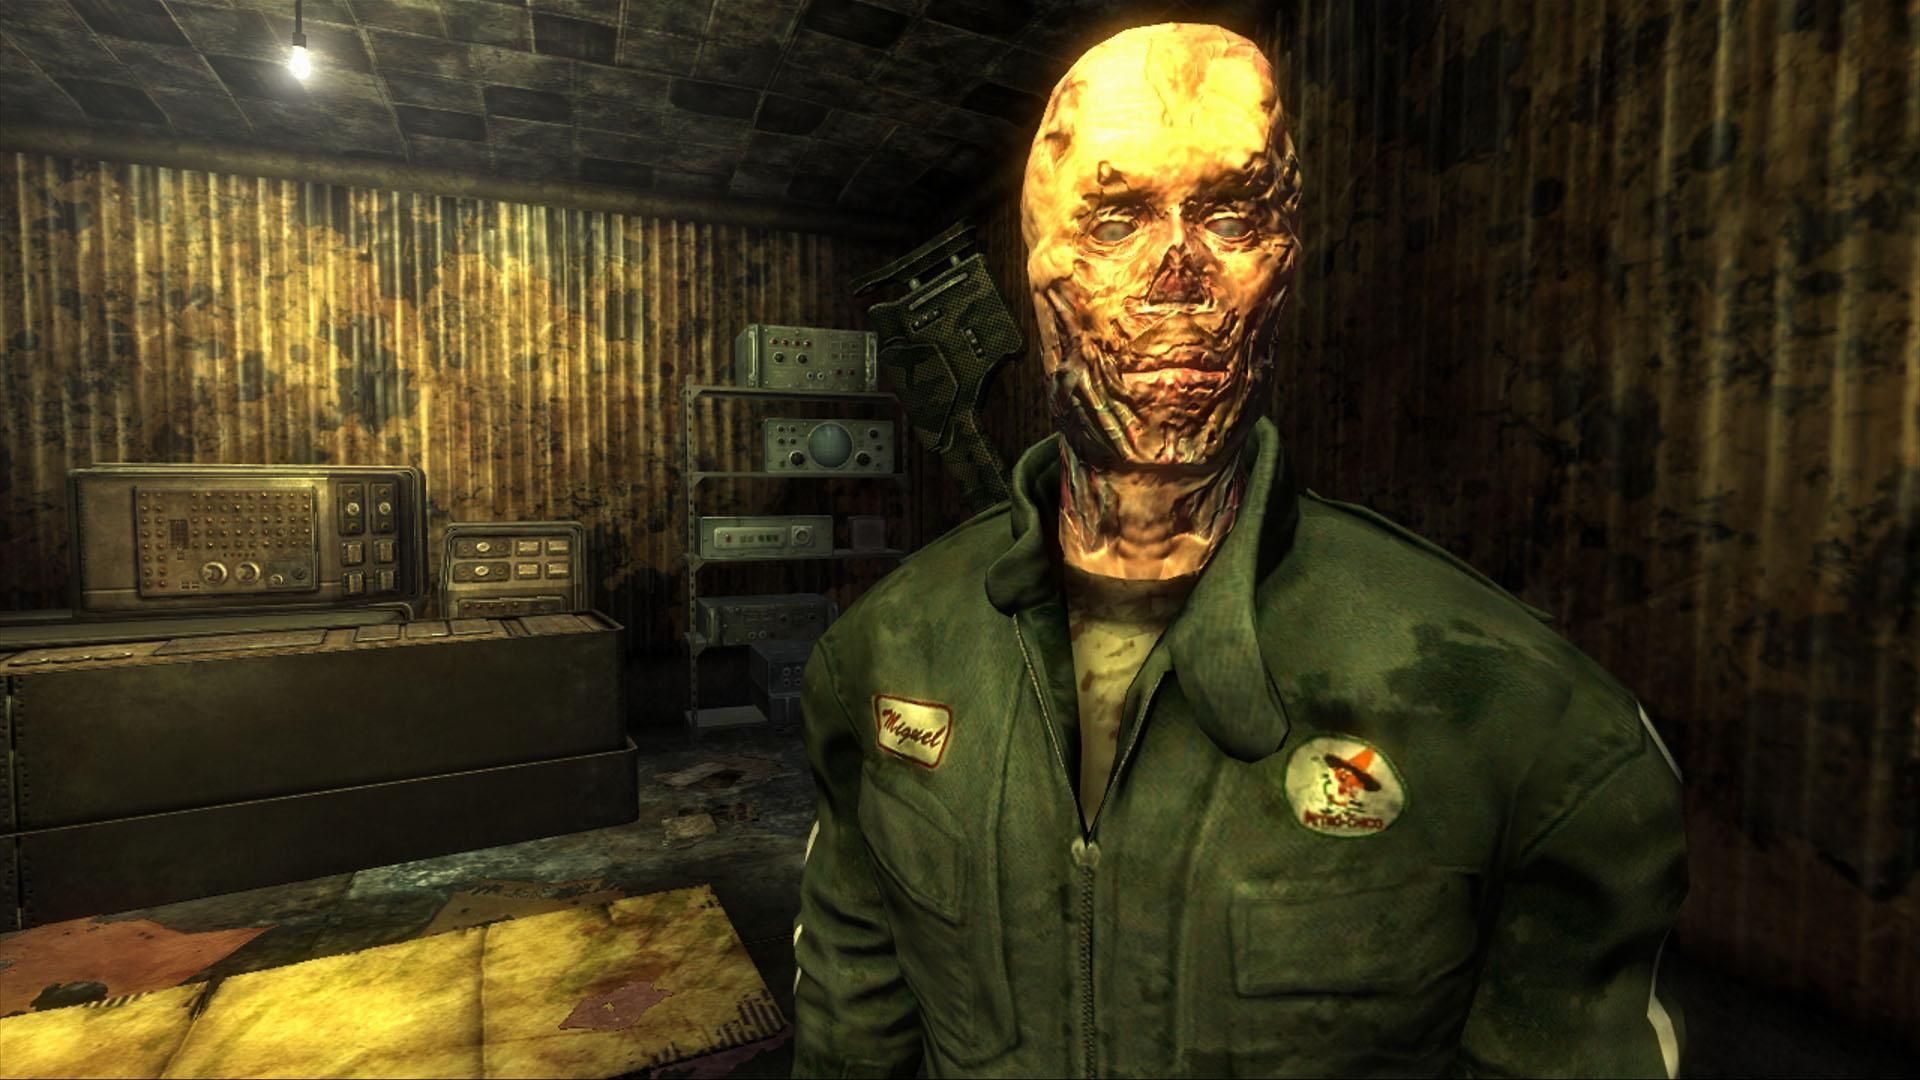 Fallout New Vegas multiplayer mod: Co-op mode, how to play, and more